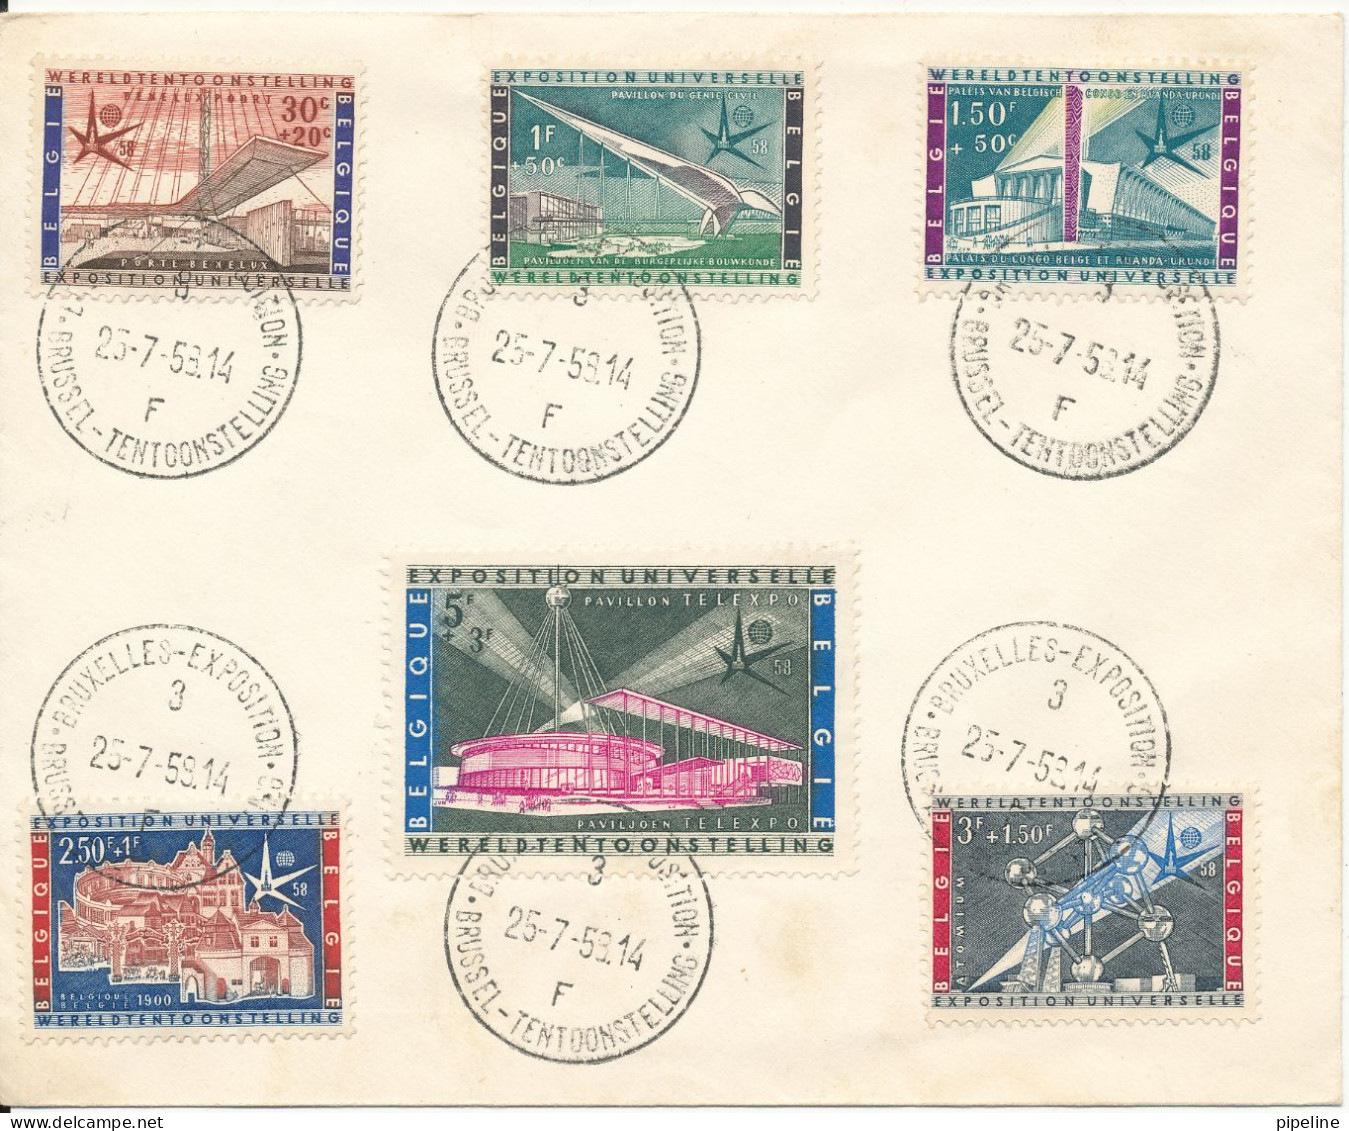 Belgium Cover With Complete Set Of 6 EXPO 58 Exhibition Postmarks 25-7-1958 - 1958 – Brussels (Belgium)